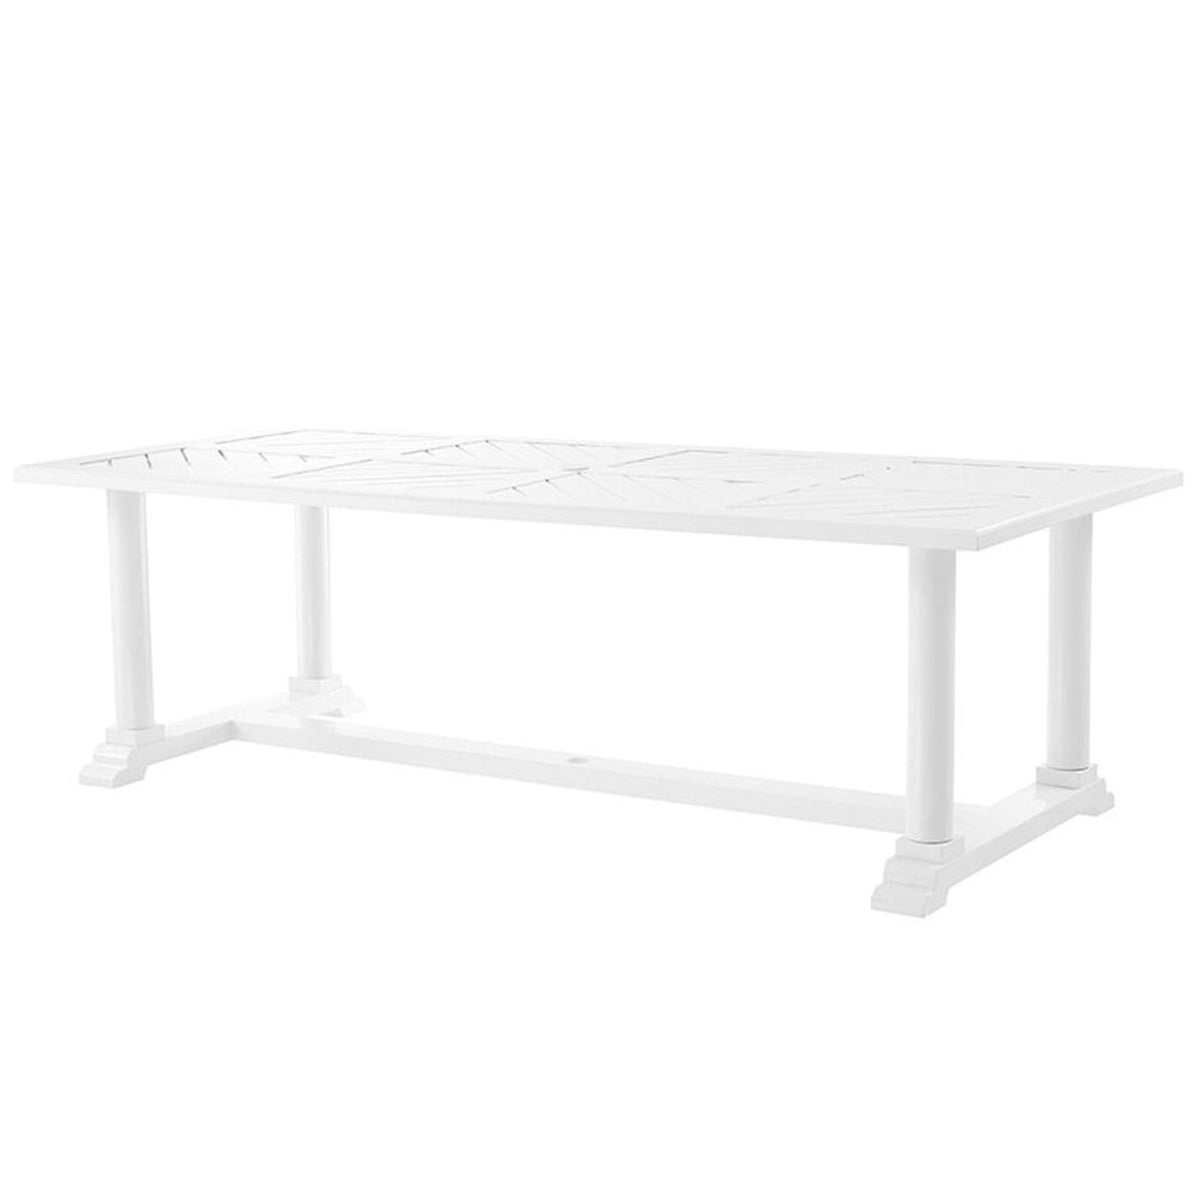 Bell Rive Outdoor Dining Table, White